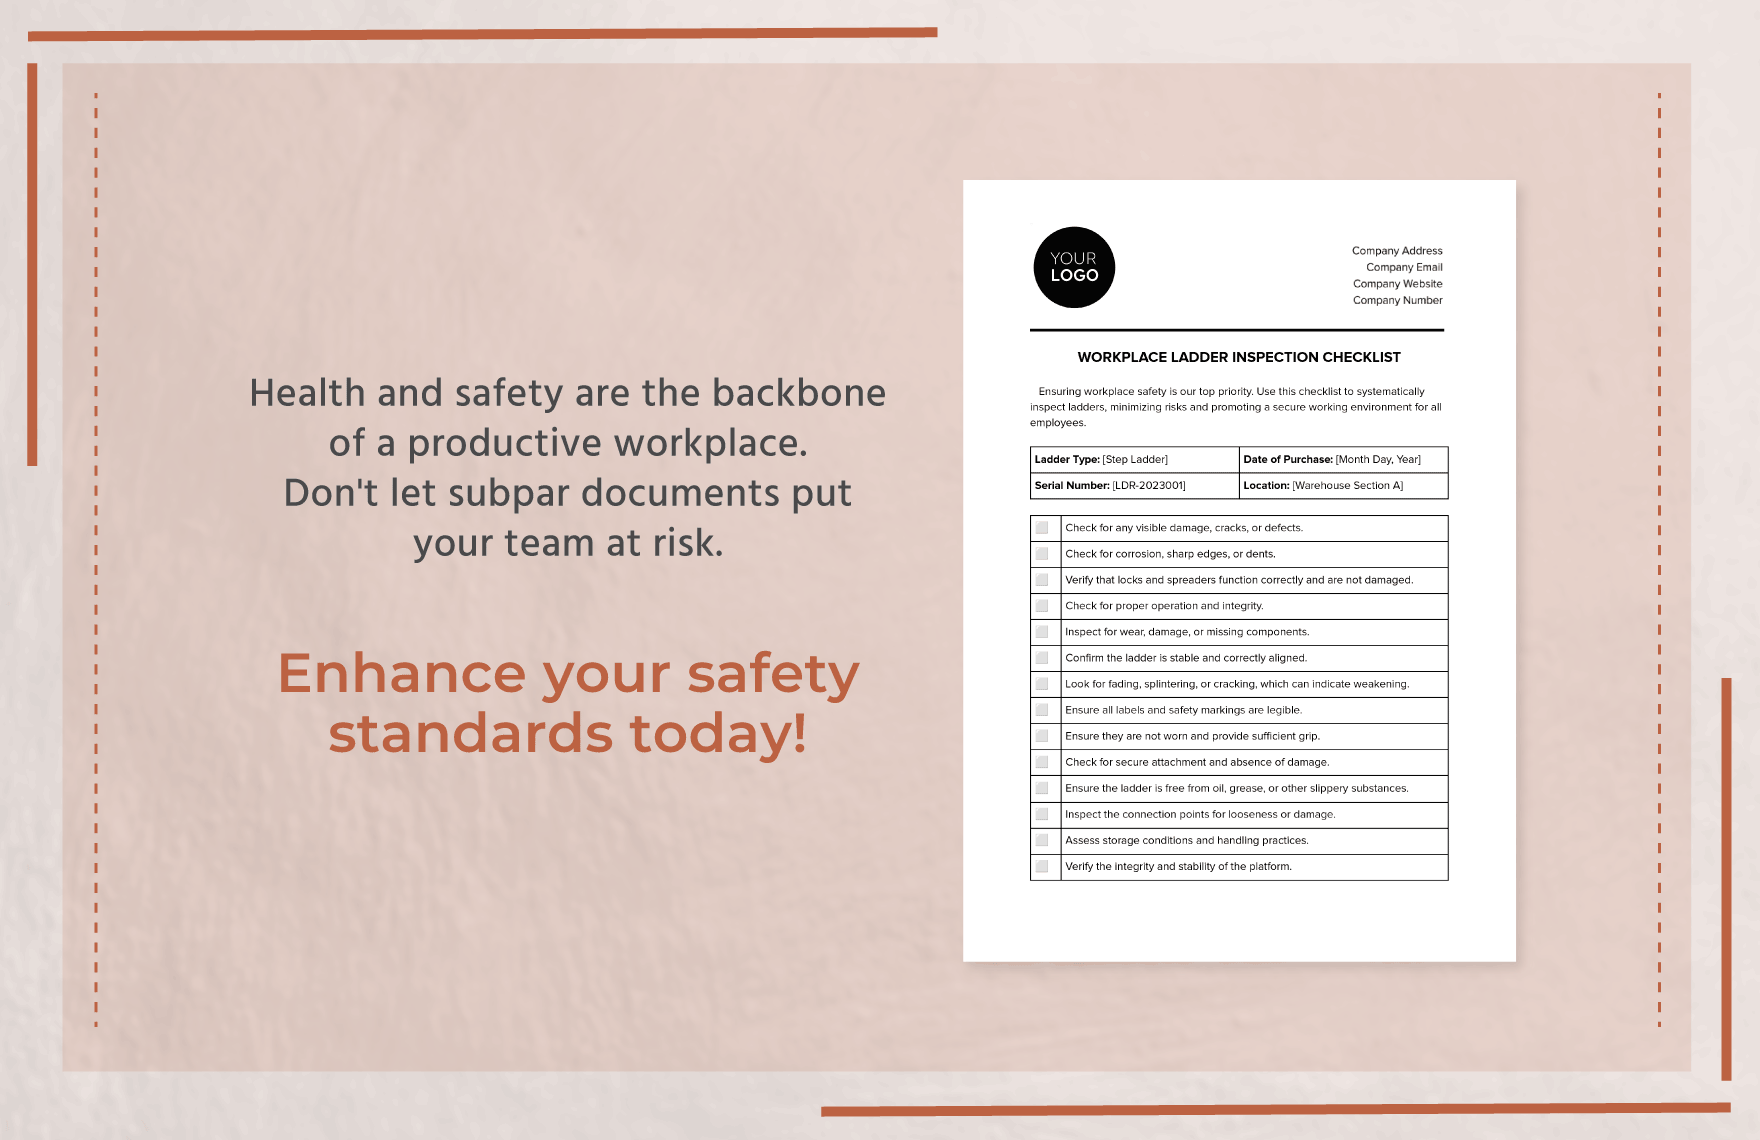 Workplace Ladder Inspection Checklist Template